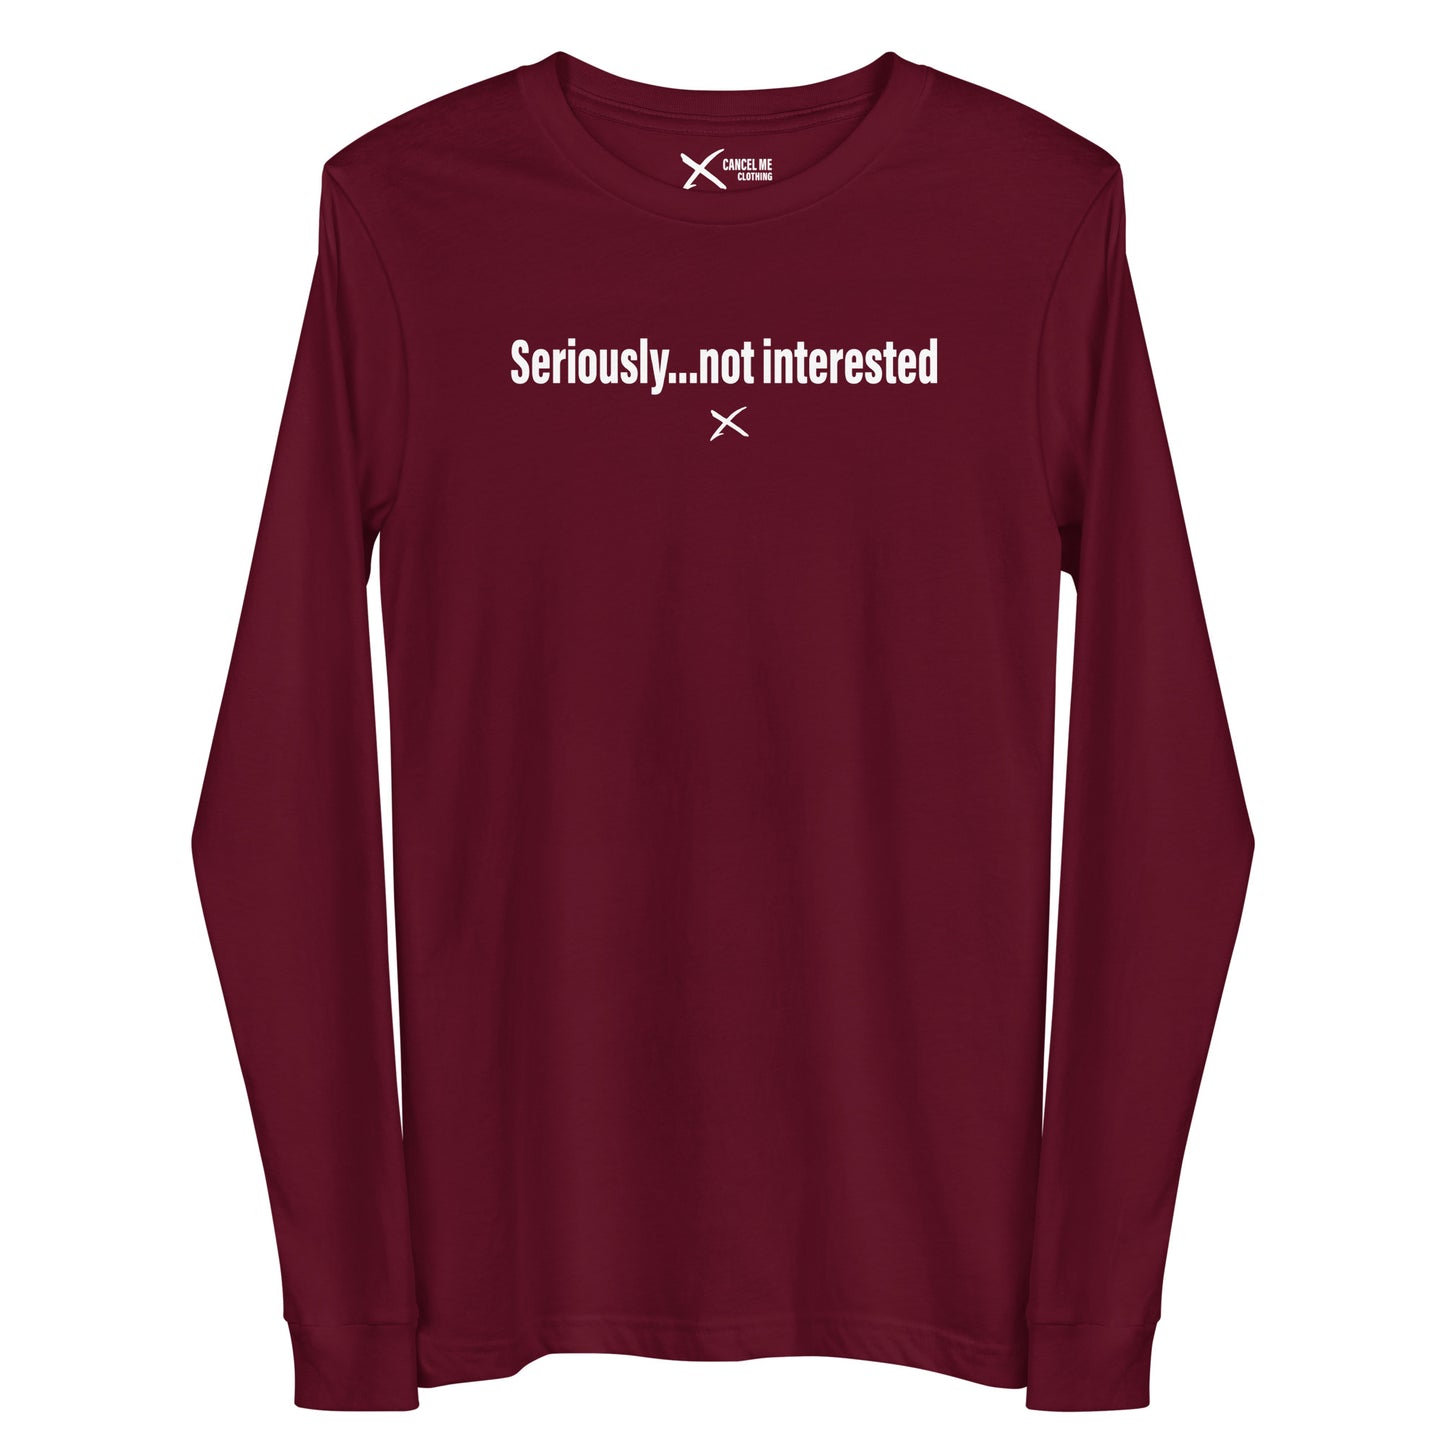 Seriously...not interested - Longsleeve